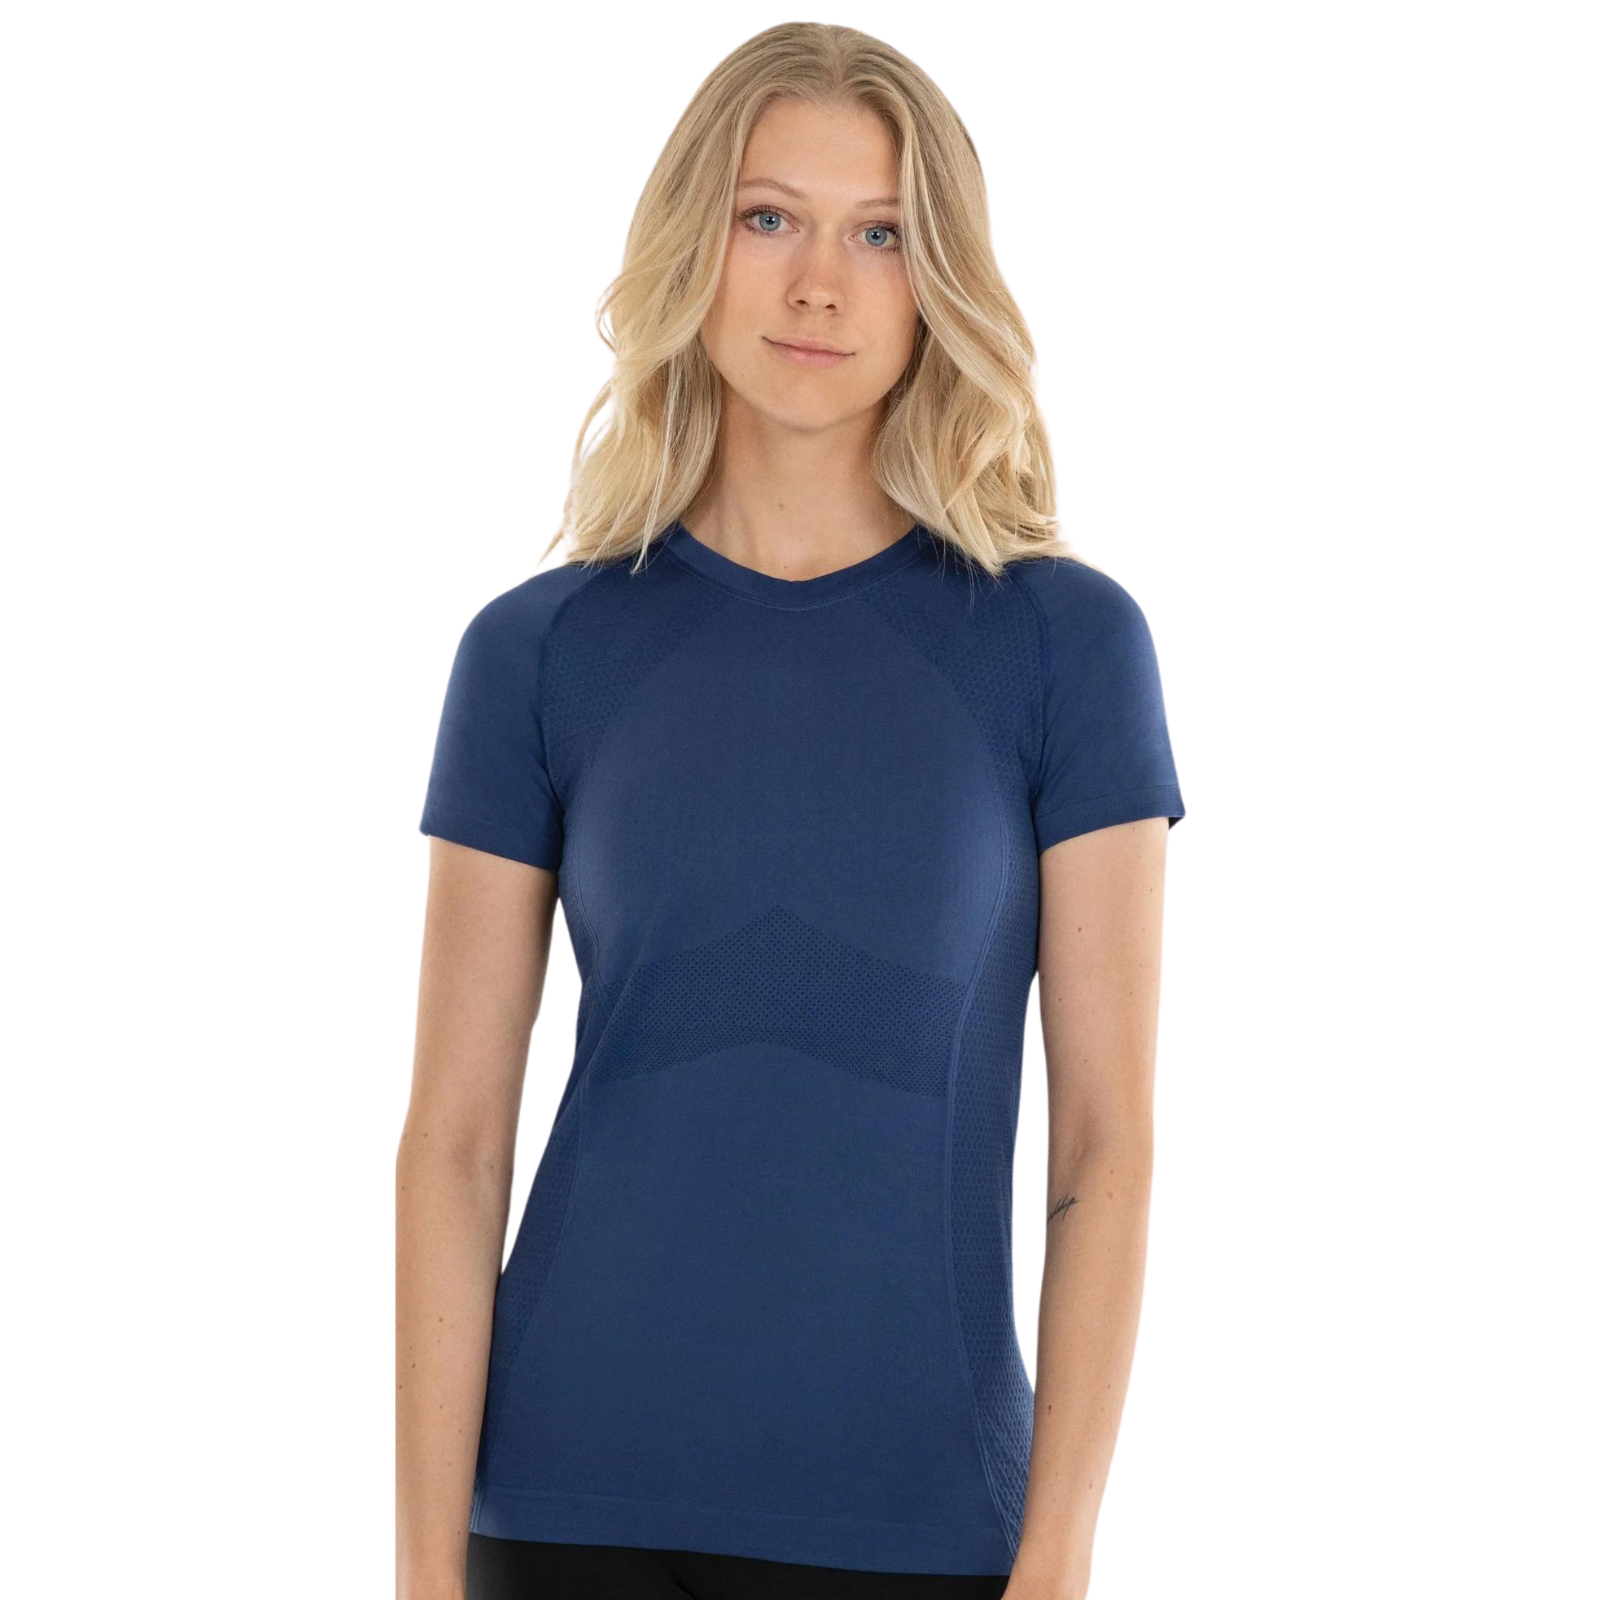 Anique Short Sleeve Crew Shirt in Blueberry - Women&#39;s Large (10)